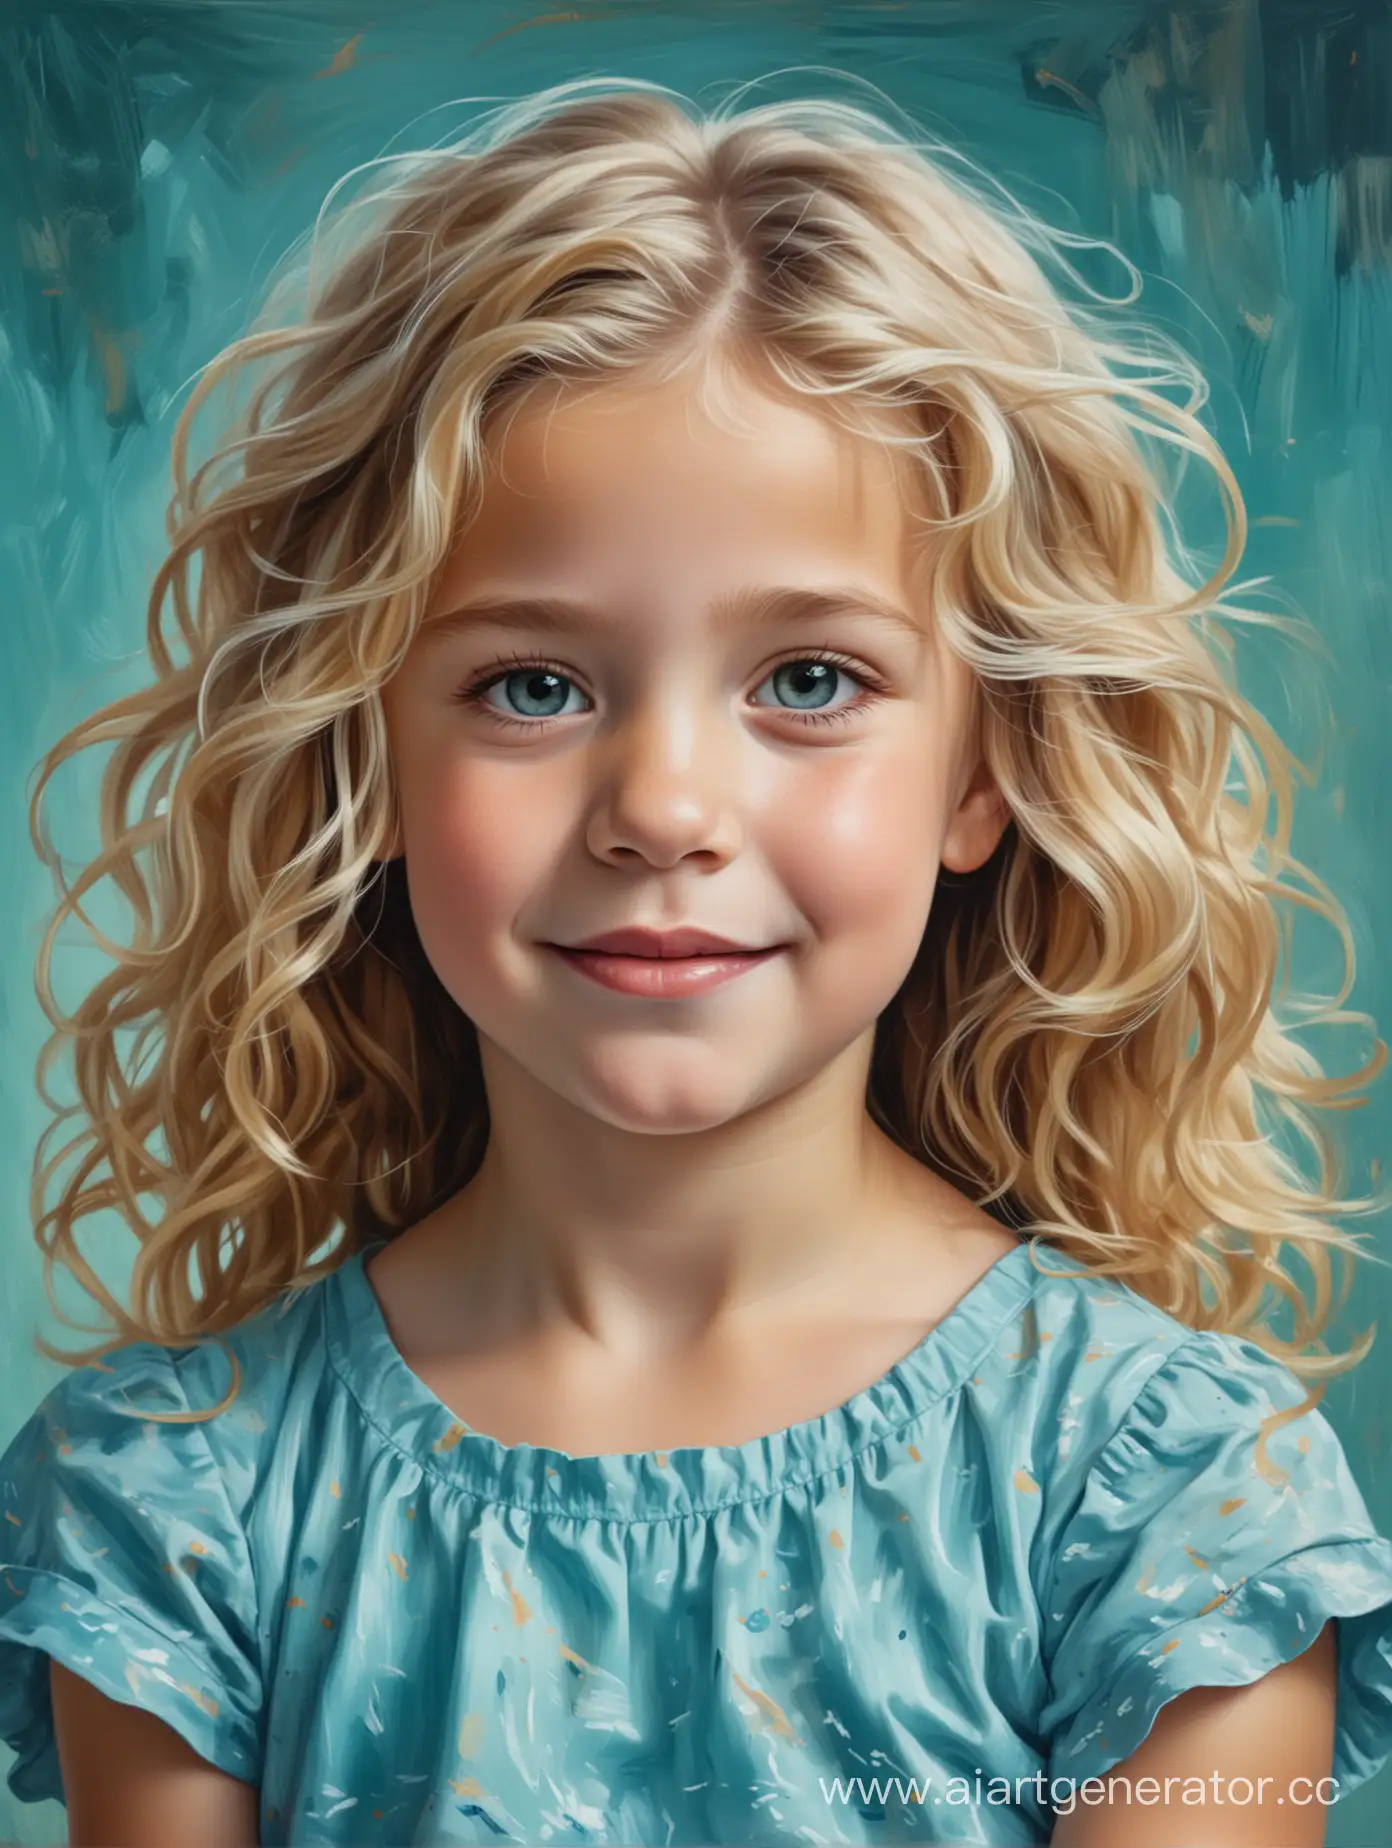 Portrait of a 5 year old girl with blonde wavy hair in a blue dress background brushstrokes turquoise